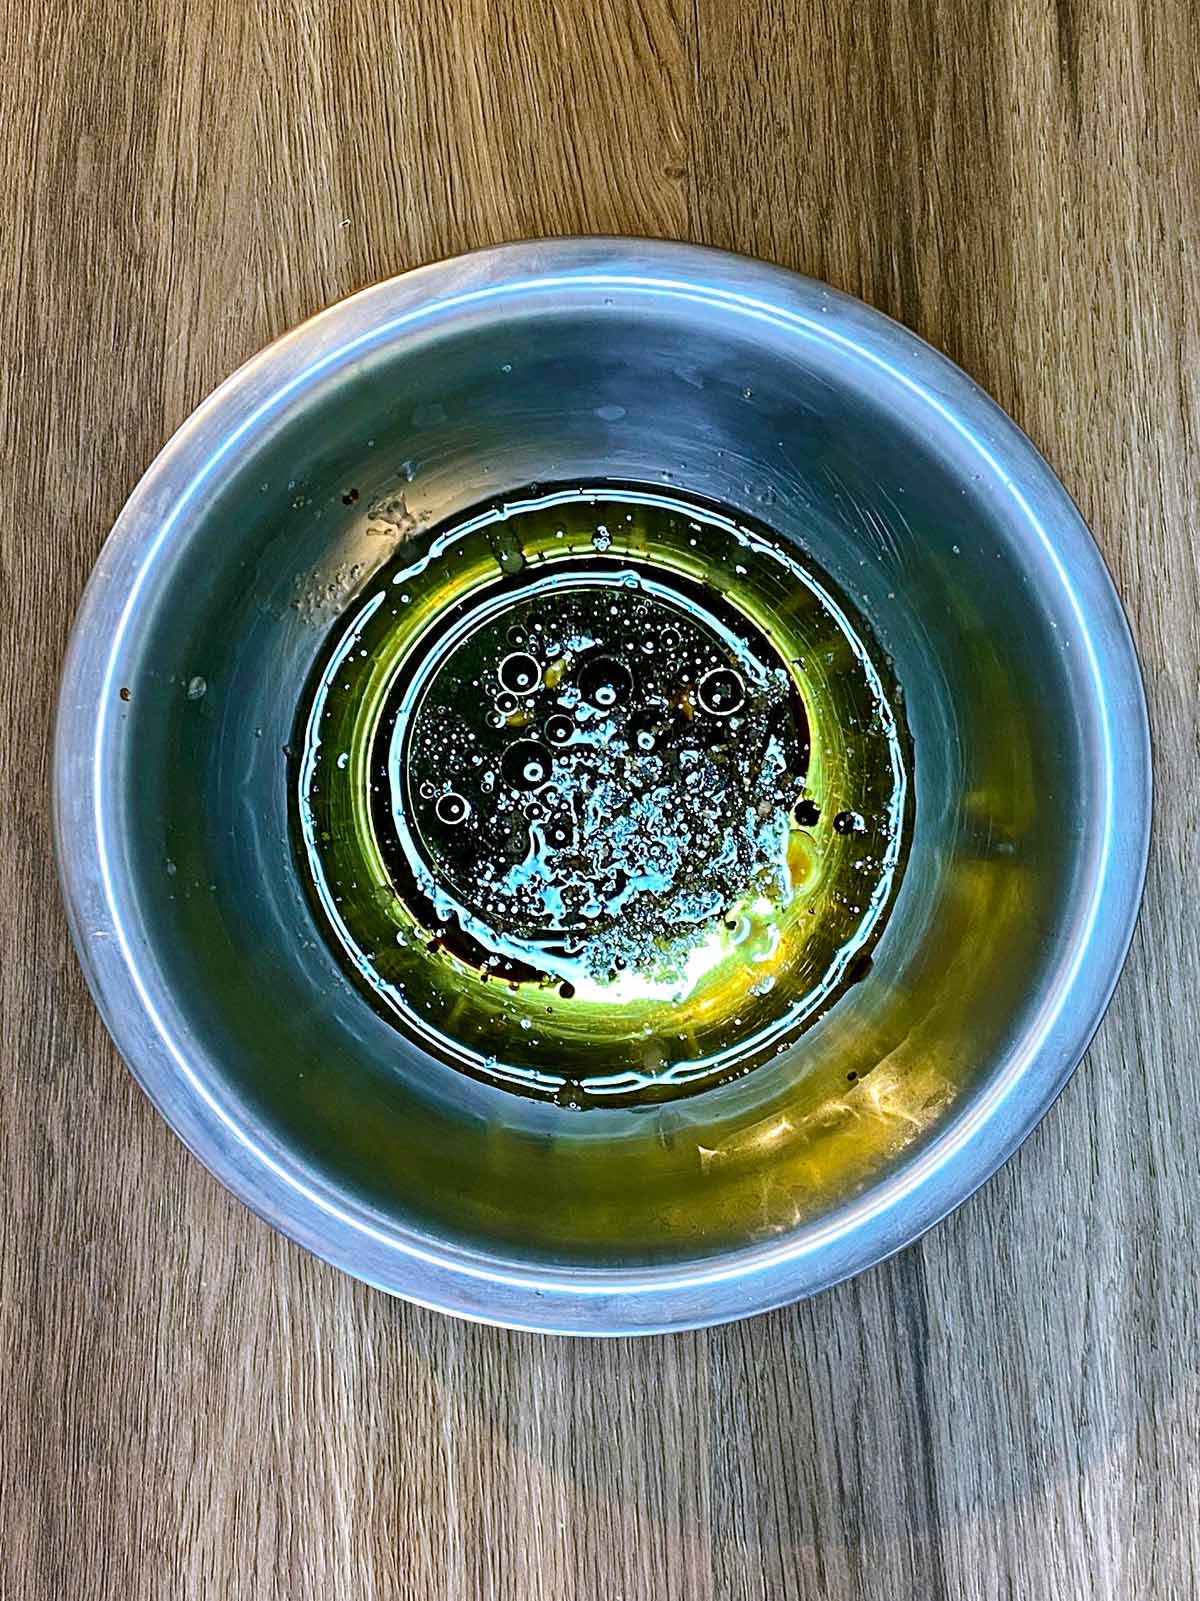 A simple vinaigrette in a small mixing bowl.